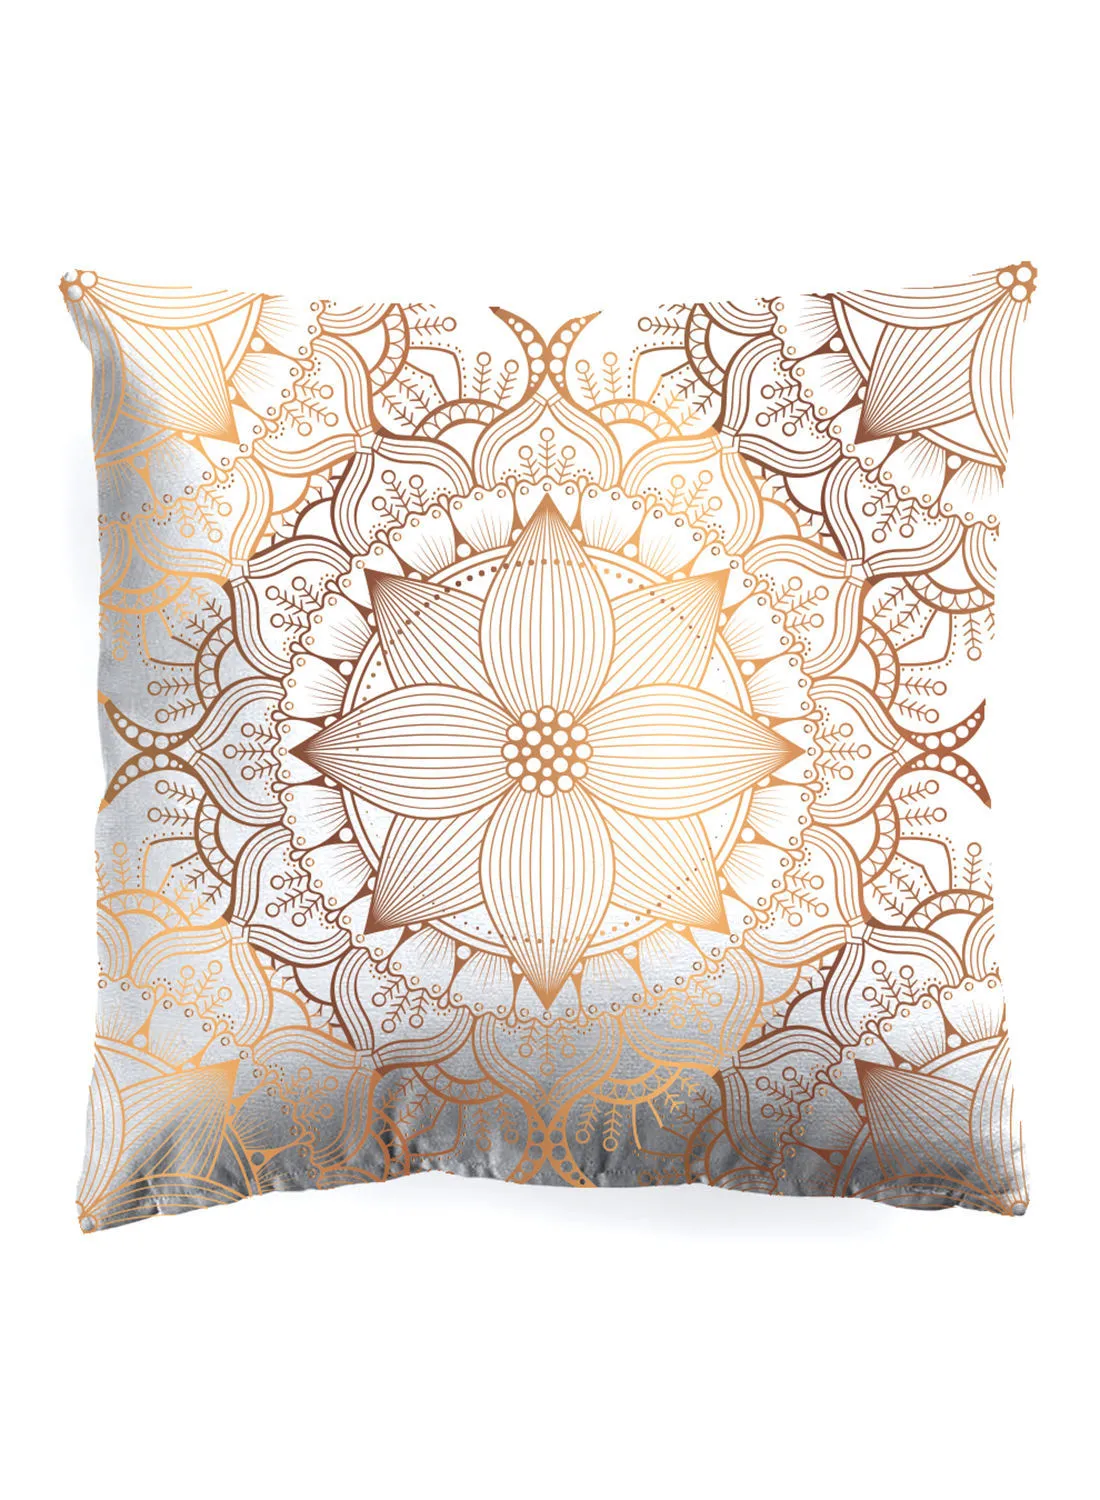 noon east Decorative Cushion , Size 45X45 Cm Hana - 100% Cotton Cover Microfiber Infill Bedroom Or Living Room Decoration